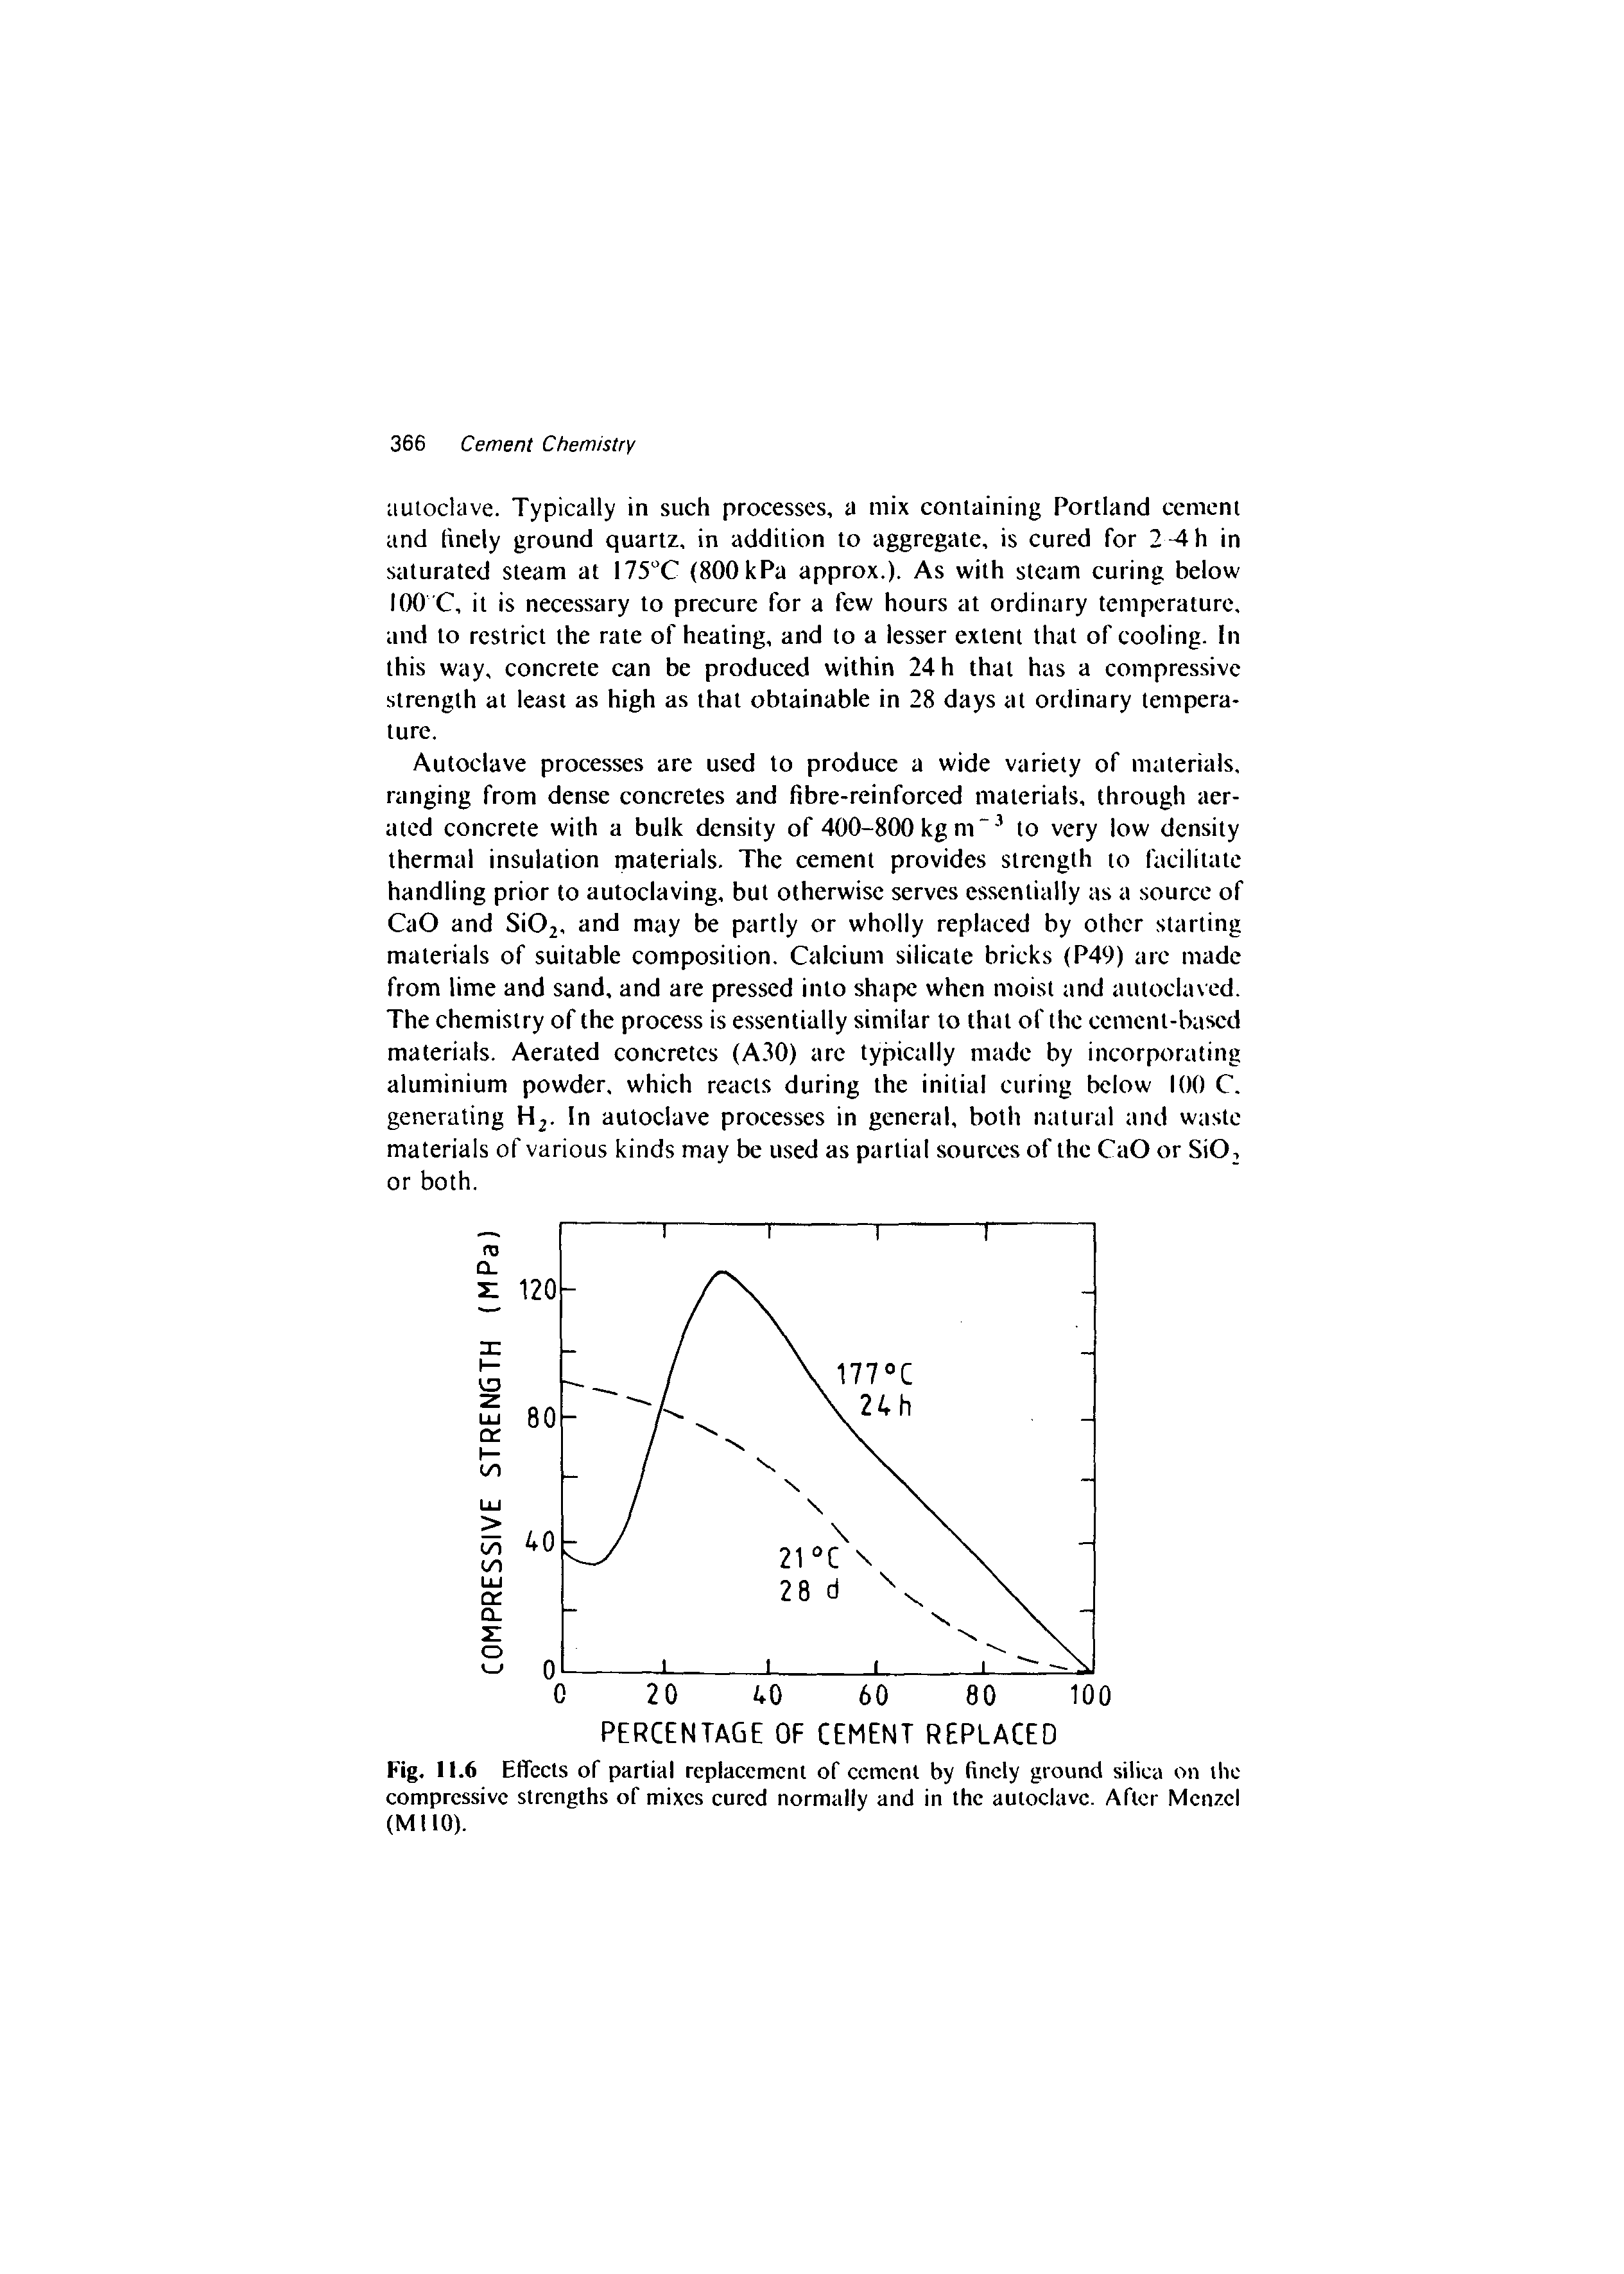 Fig. 11.6 Effects of partial replacement of cement by finely ground silica on the compressive strengths of mixes cured normally and in the autoclave. After Mcnzcl (MHO).